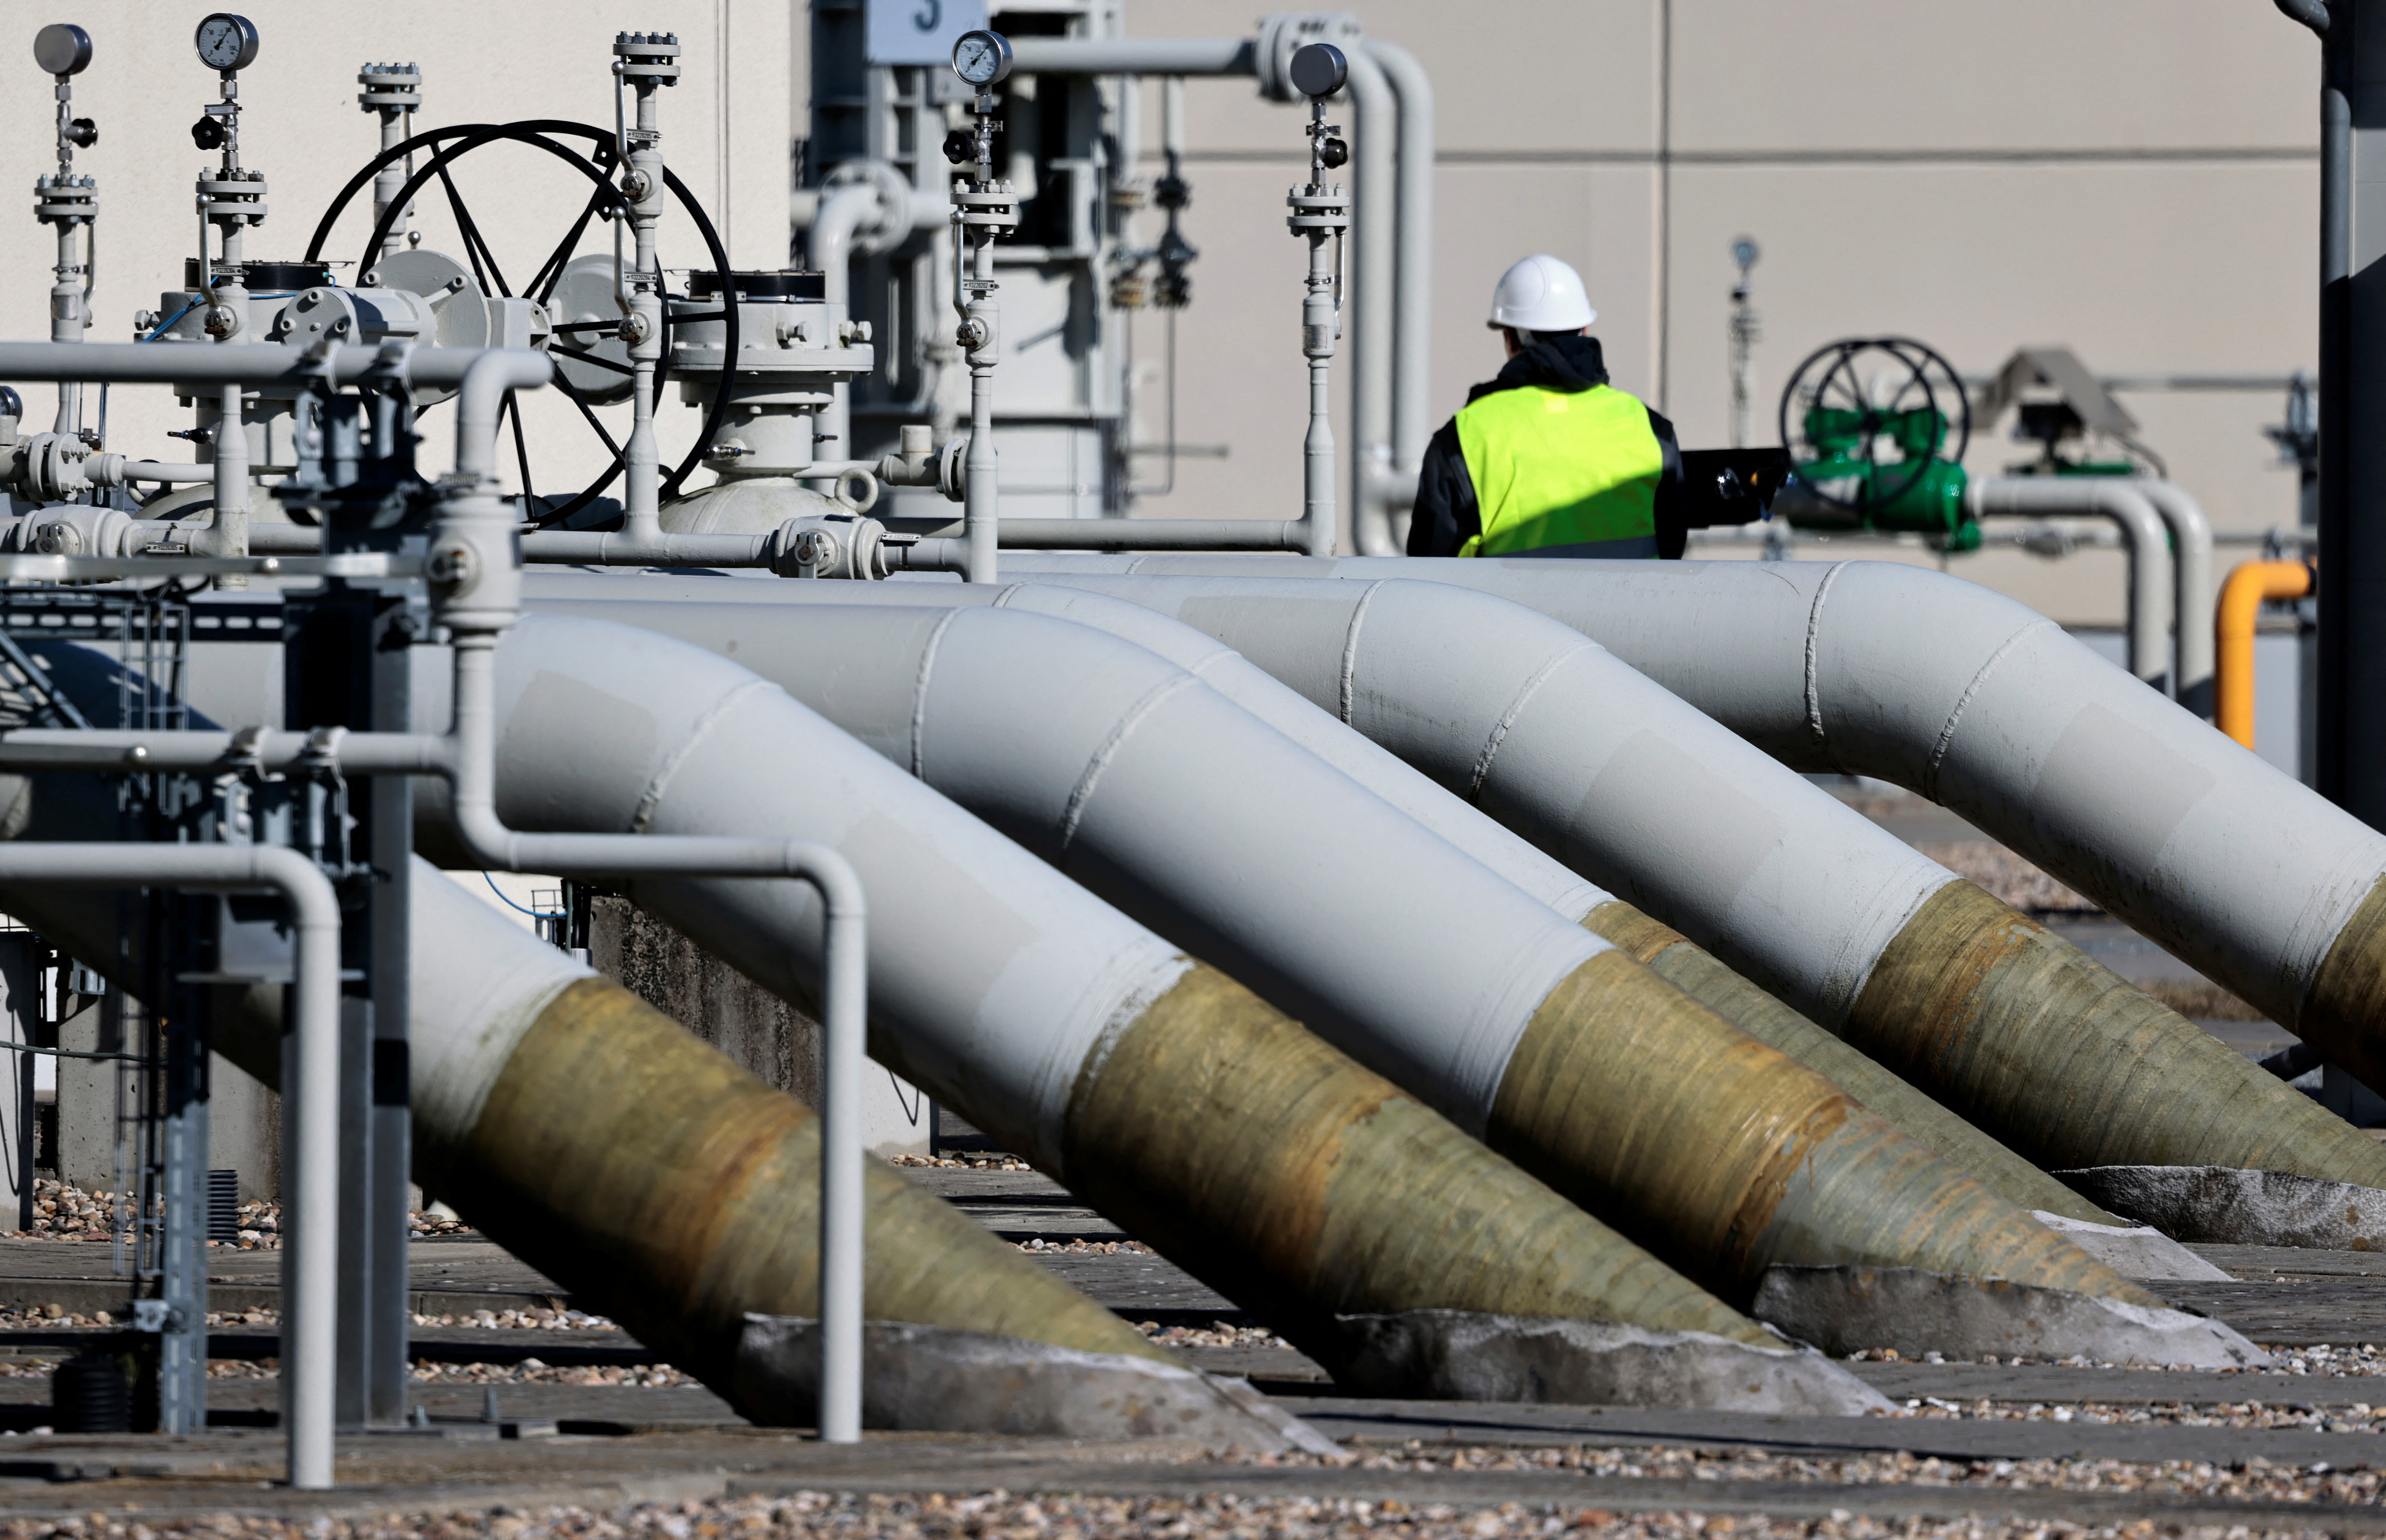 FILE PHOTO: Pipes at the landfall facilities of the 'Nord Stream 1' gas pipeline are pictured in Lubmin, Germany, March 8, 2022. REUTERS/Hannibal Hanschke